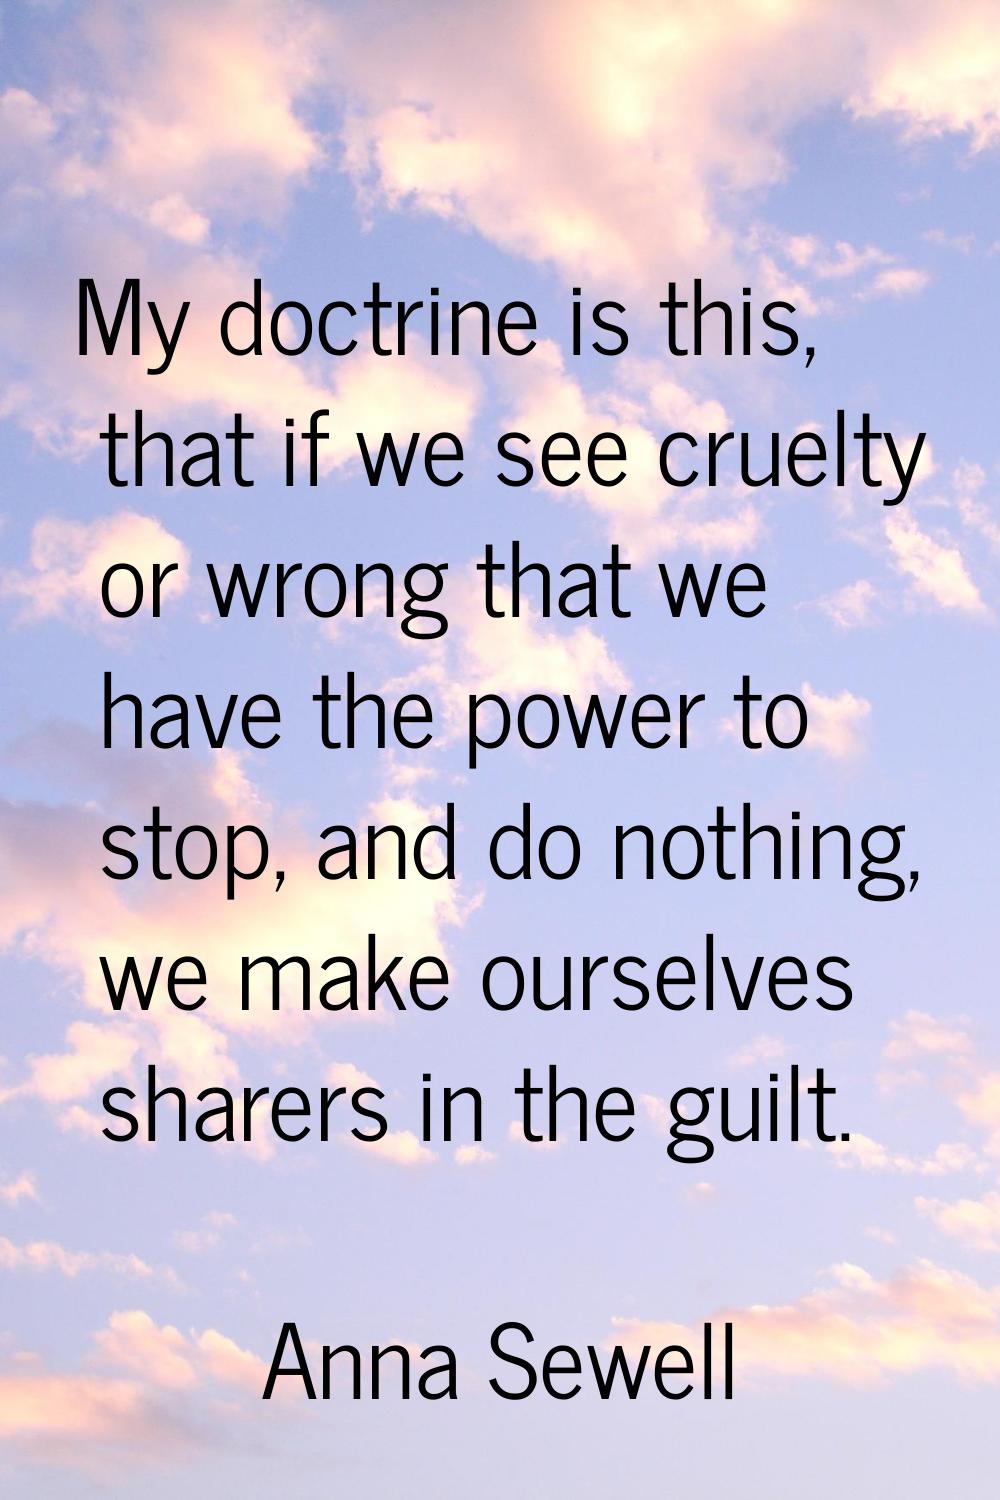 My doctrine is this, that if we see cruelty or wrong that we have the power to stop, and do nothing